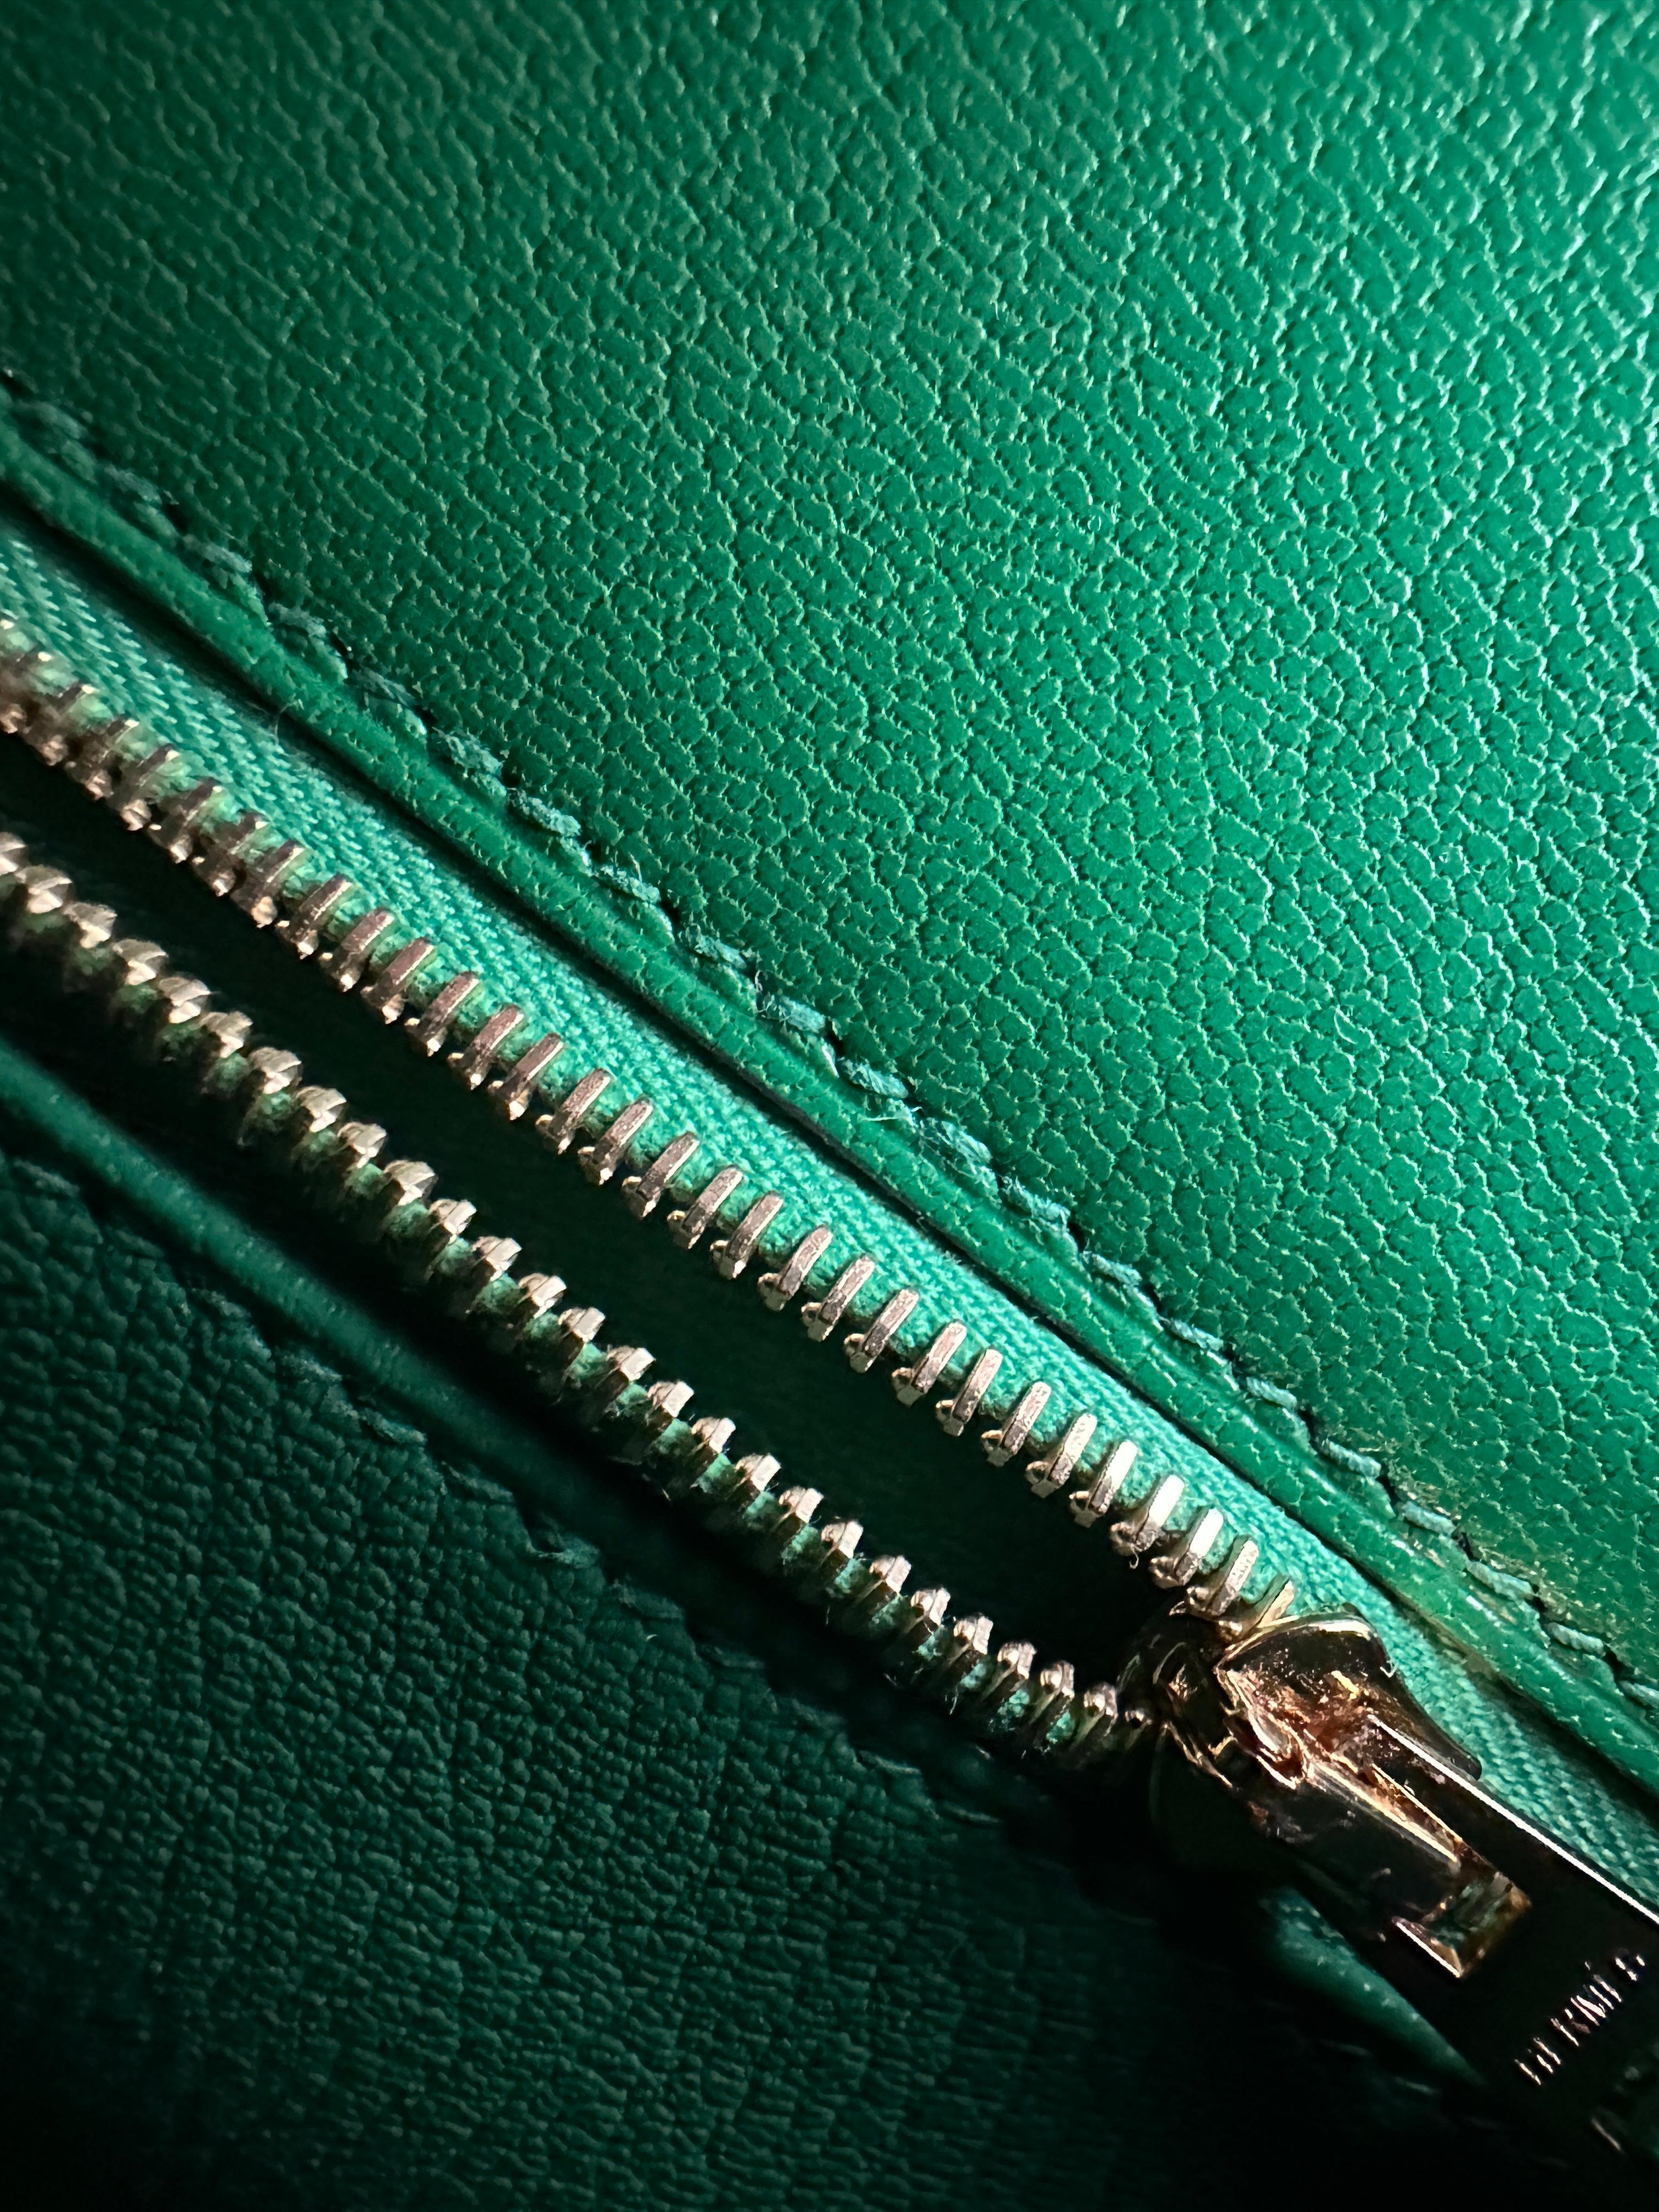 Guaranteed authentic Hermes Kelly 25 Sellier bag featured in stunning Bambou
The most popular green.
Leather is Chevre, one of the most collected leathers because of its durability 
The Hermes Kelly 25 is a  handbag from the French luxury brand